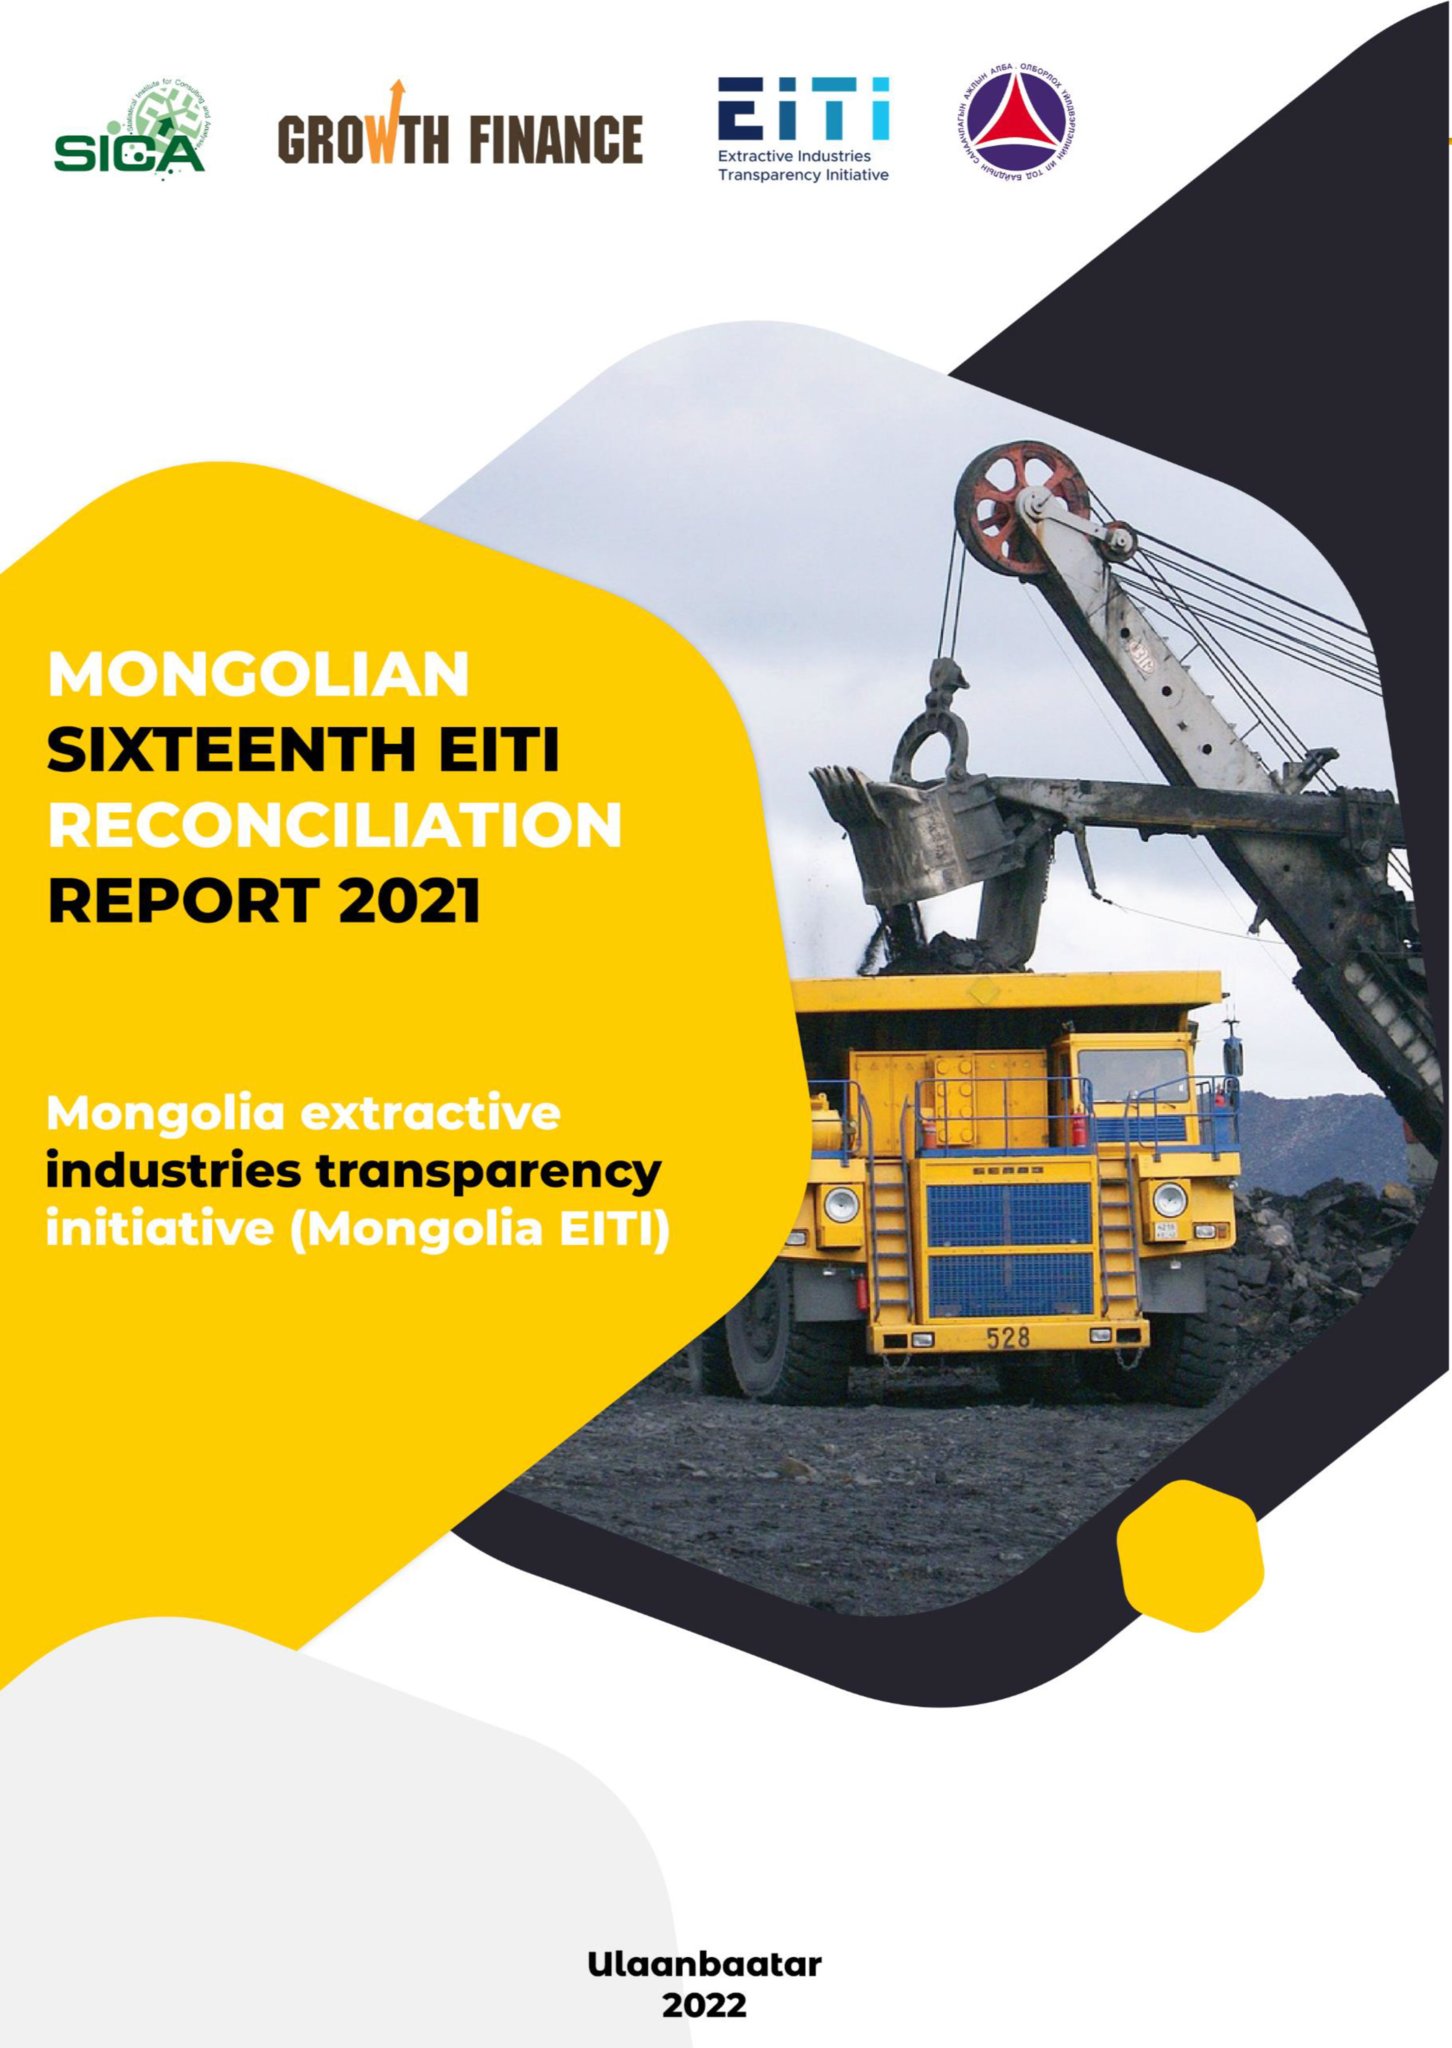 The brief of Mongolia EITI 2021 report is available in video form. You can access it through the link below.